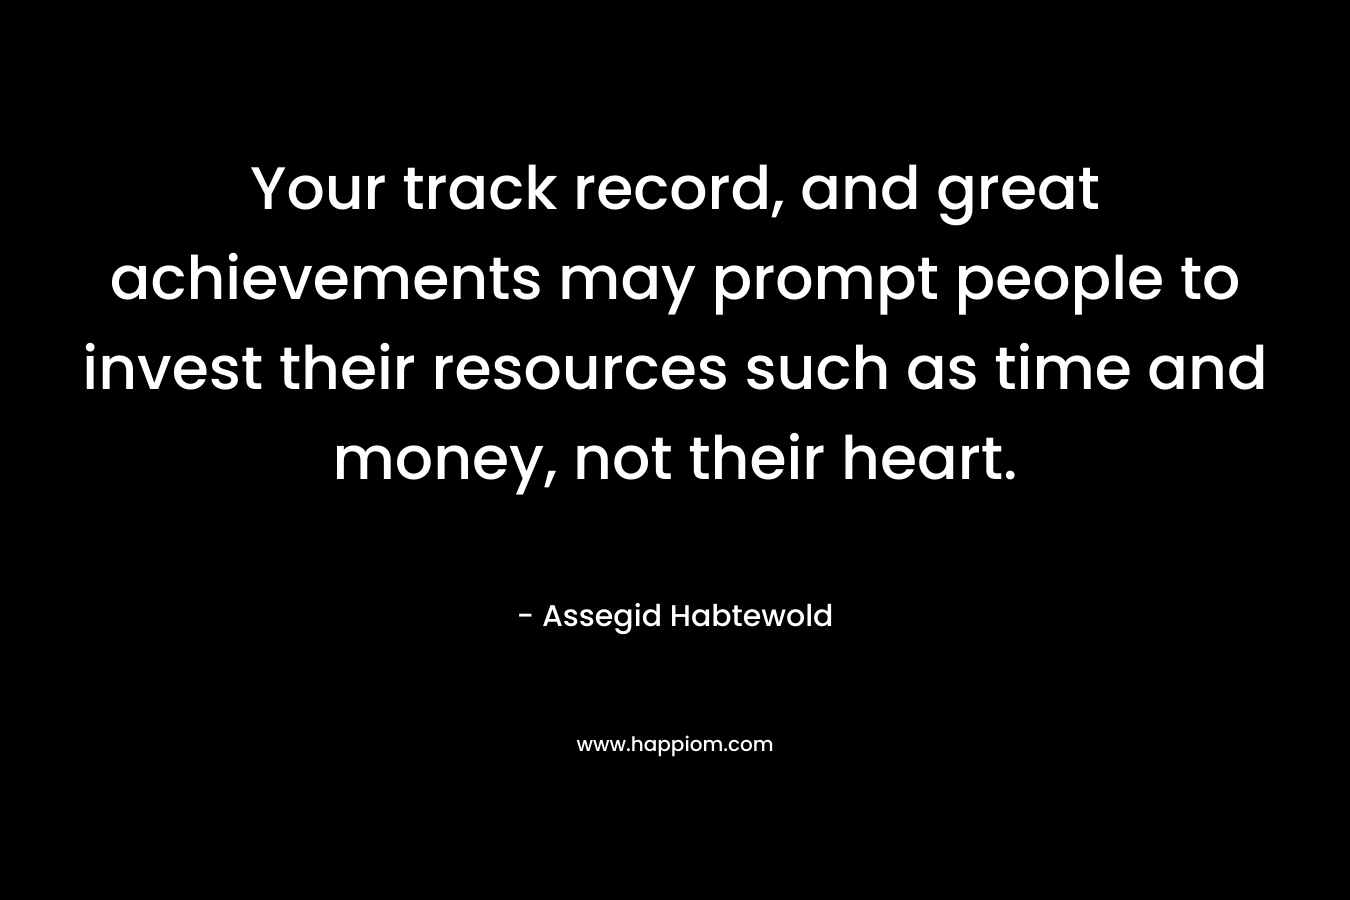 Your track record, and great achievements may prompt people to invest their resources such as time and money, not their heart.